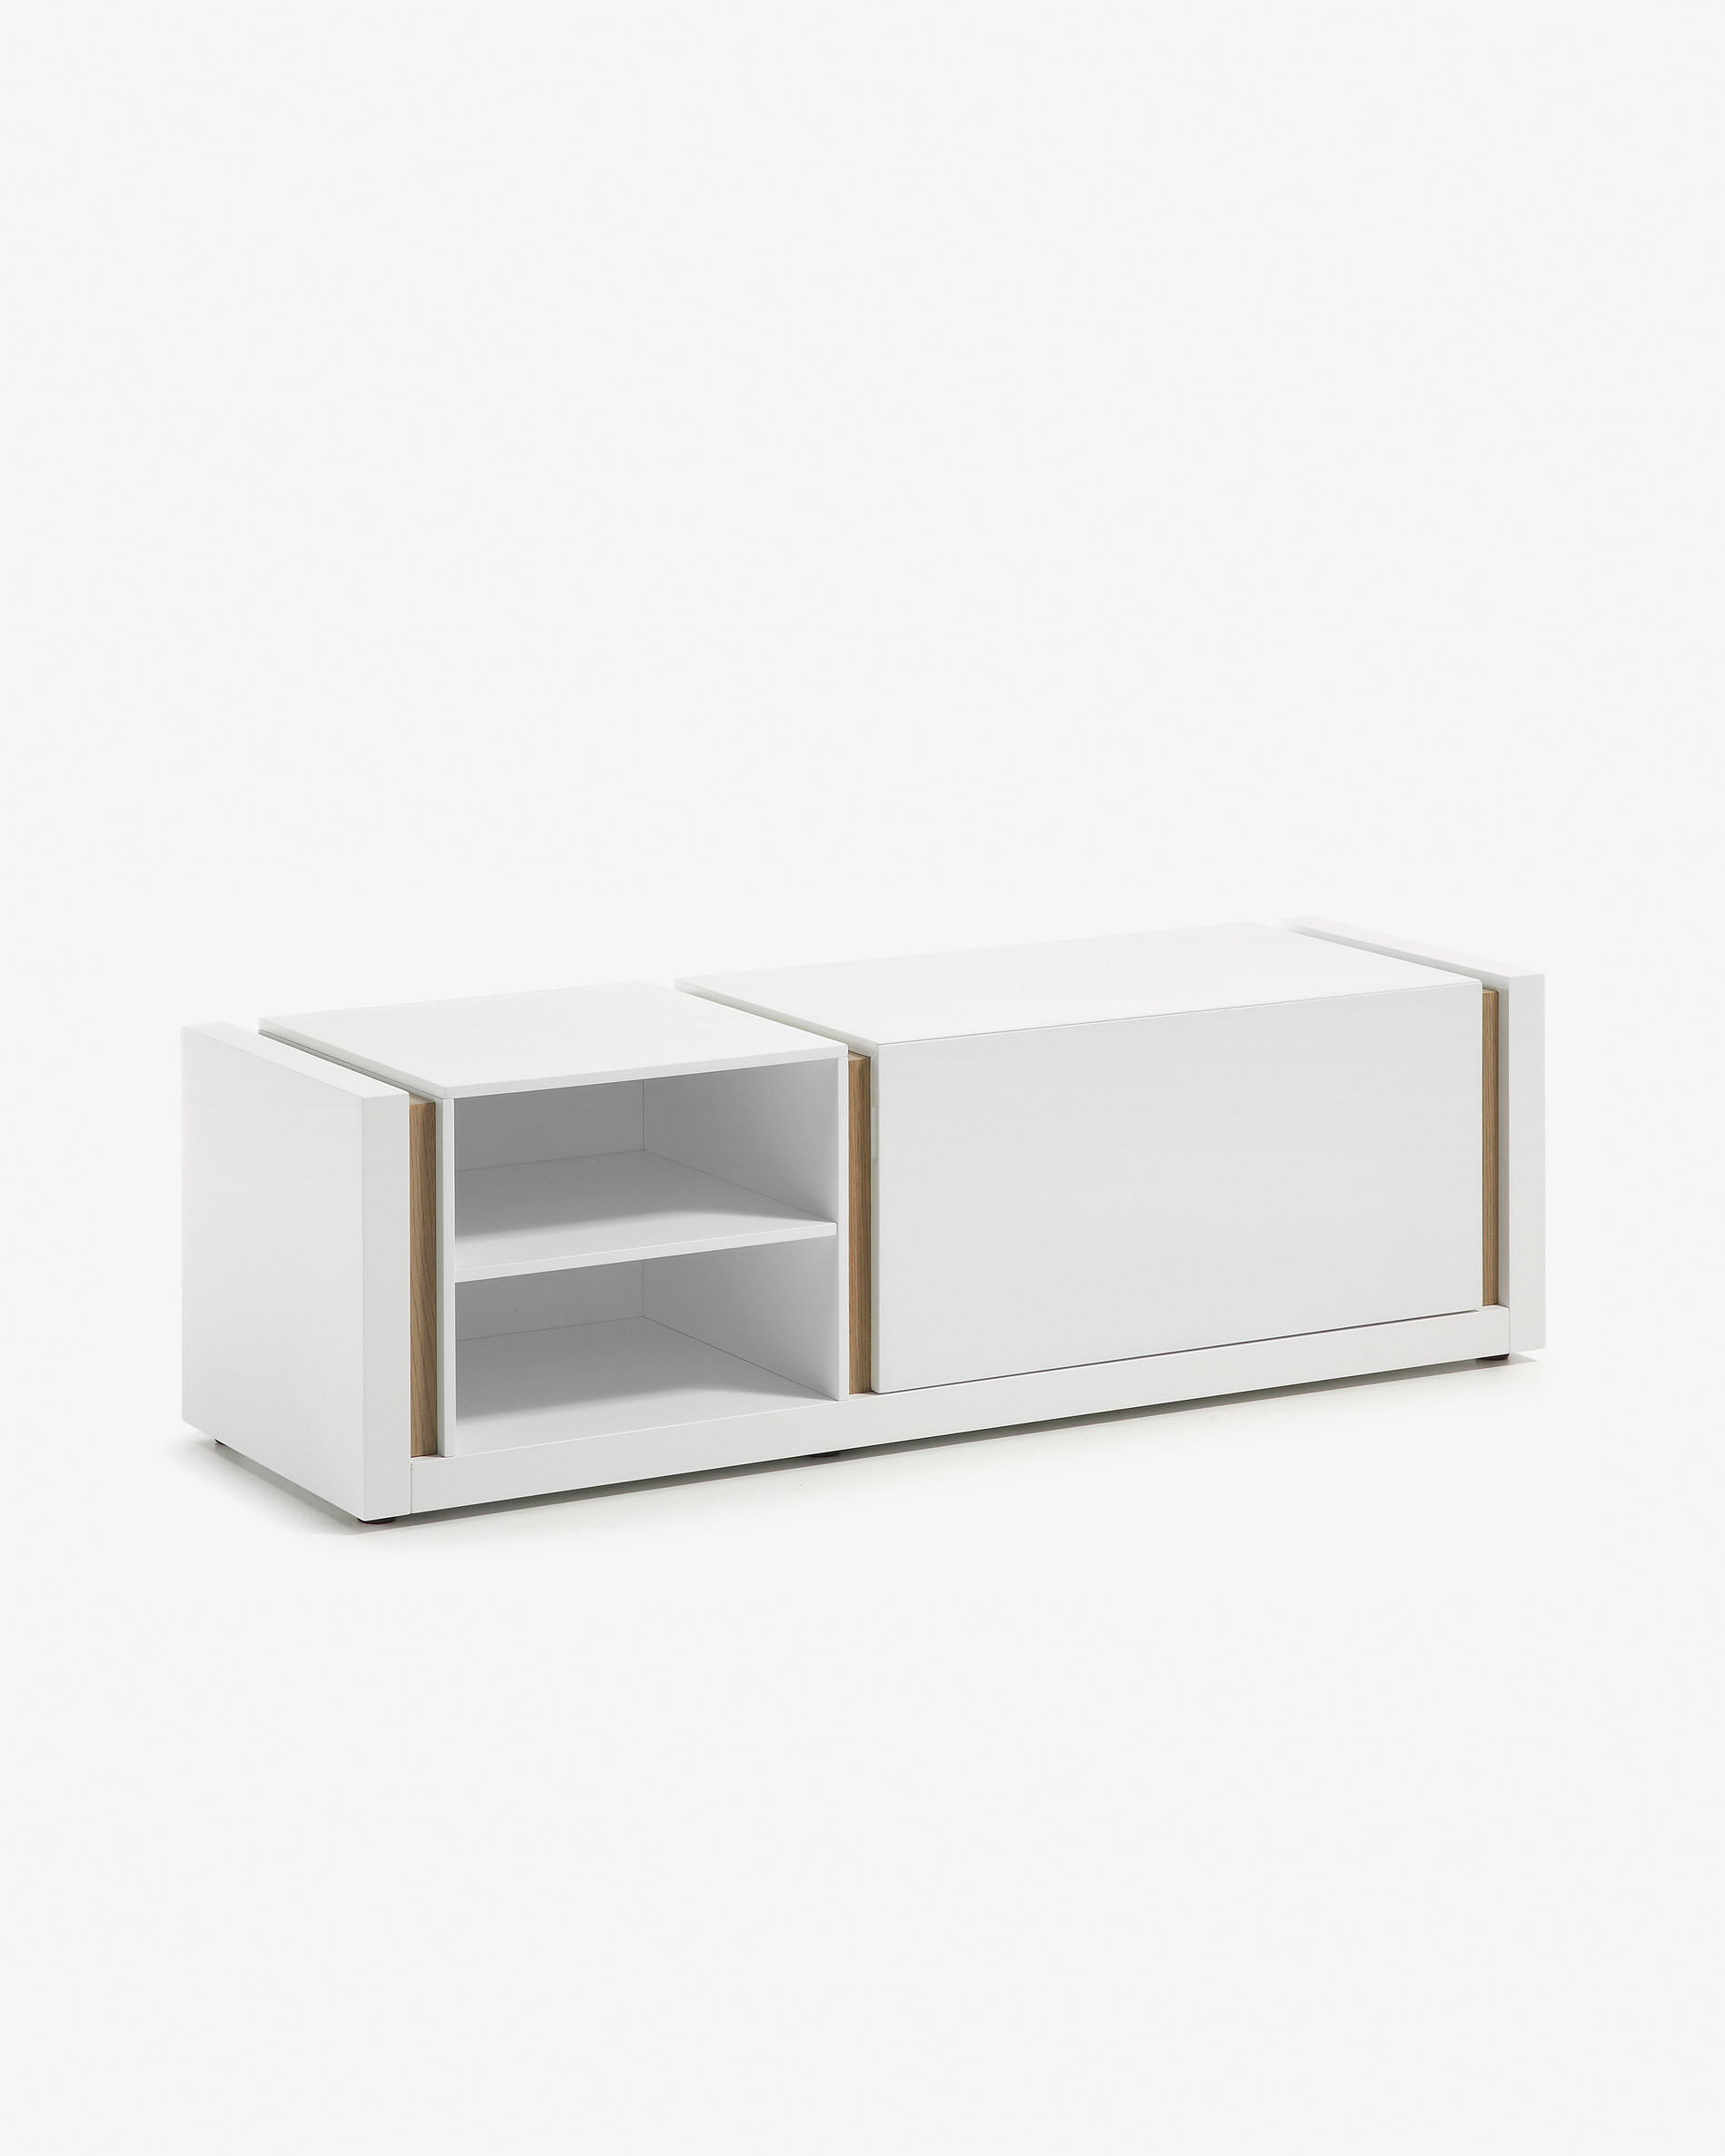 DE TV stand with white lacquer and oak veneer details 140 x 42 cm